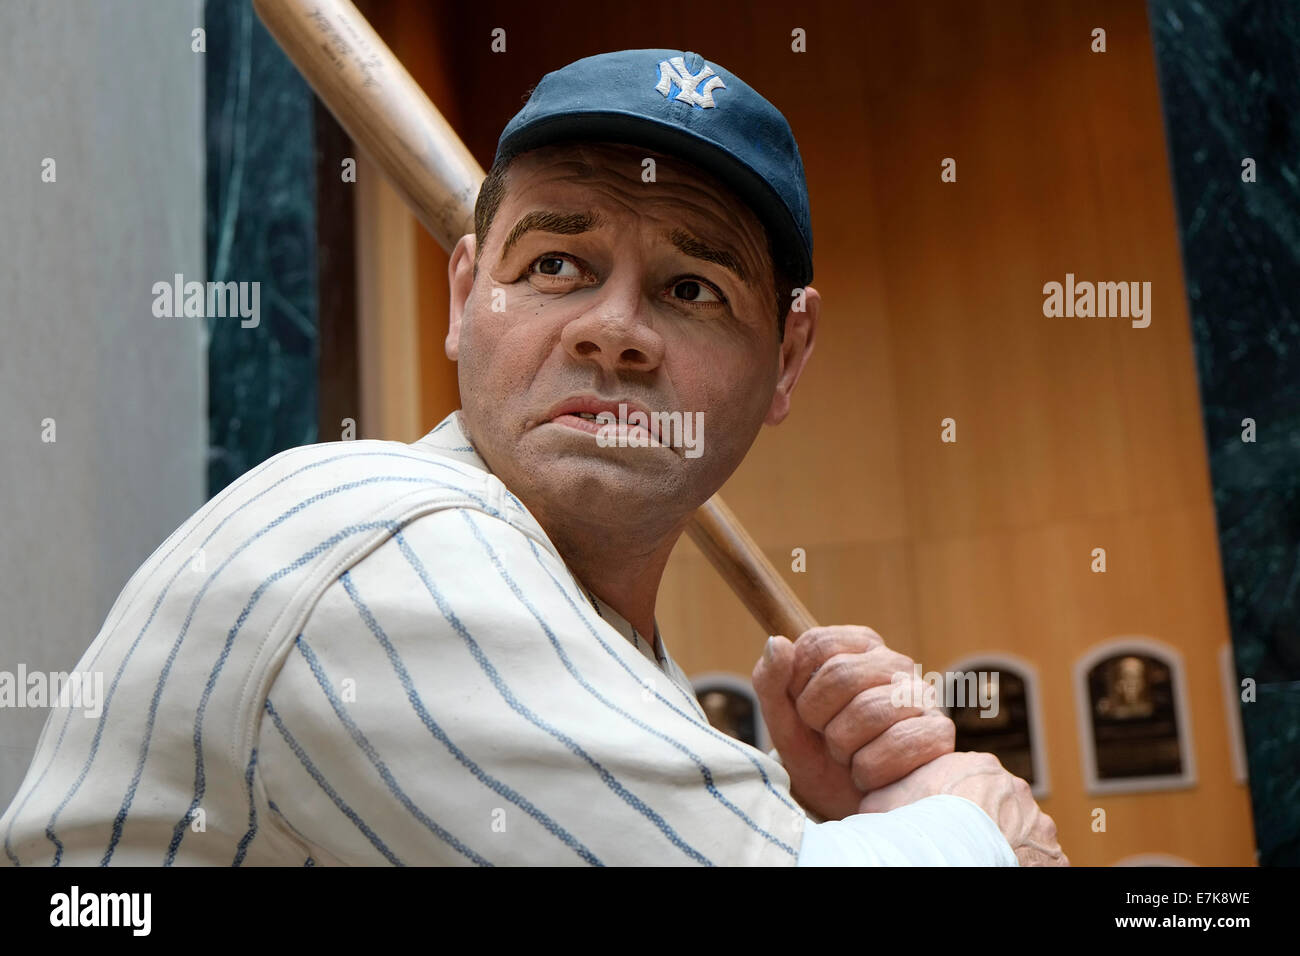 Babe Ruth National Baseball Hall of Fame Museum in Cooperstown New York Stockfoto